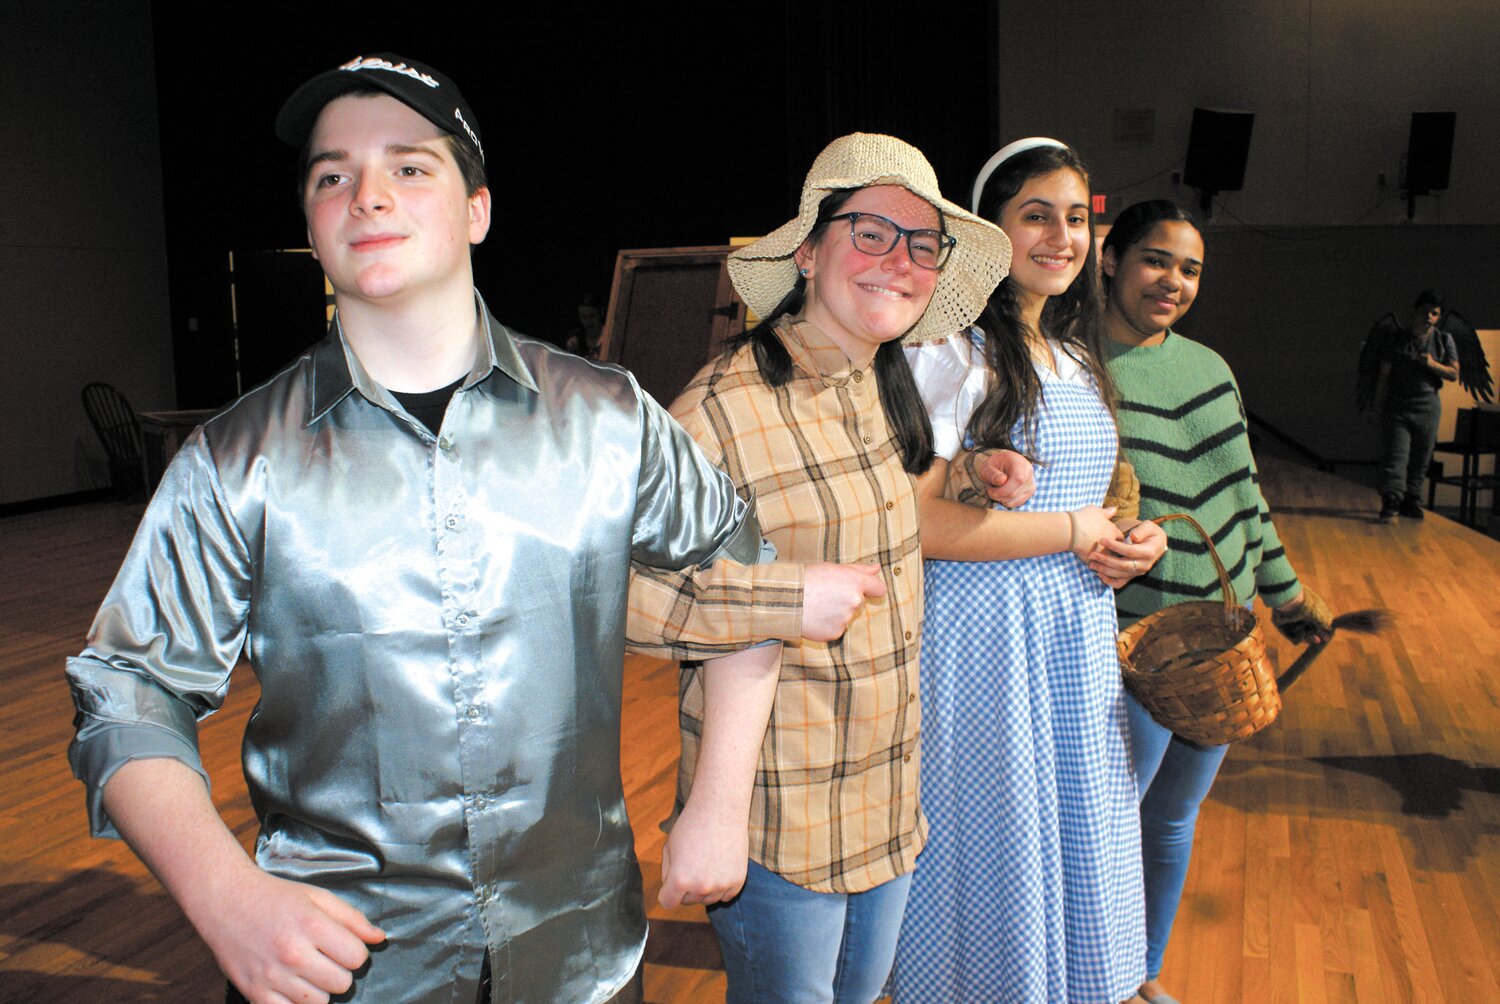 OFF TO SEE THE WIZARD: Opening night for Toll Gate Drama Club’s production of The Wizard of Oz is this Friday, March 22! See the Tin Man - Jonah Buccheri, Scarecrow - Francesca Beagan, Dorothy - Rebecca Farias, and Cowardly Lion - Jayden Murray, arm in arm, ease on down the yellow brick road. More than 50 students play a role in the production. Their names and a story are on page 16. (Warwick Beacon photo by Steve Popiel)